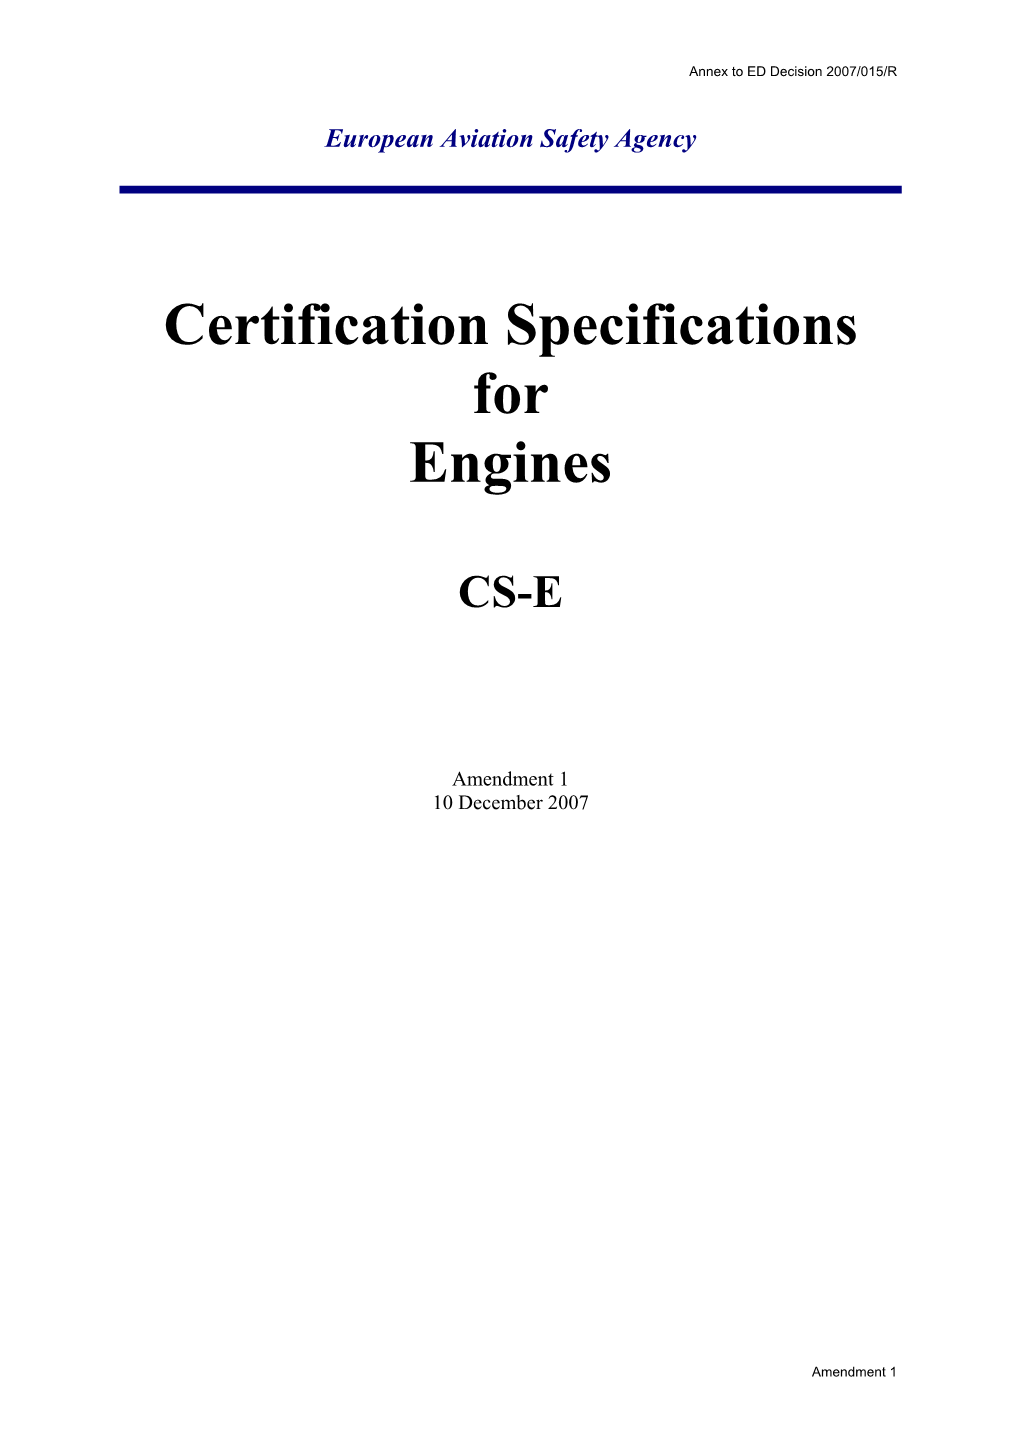 Certification Specification for Engines